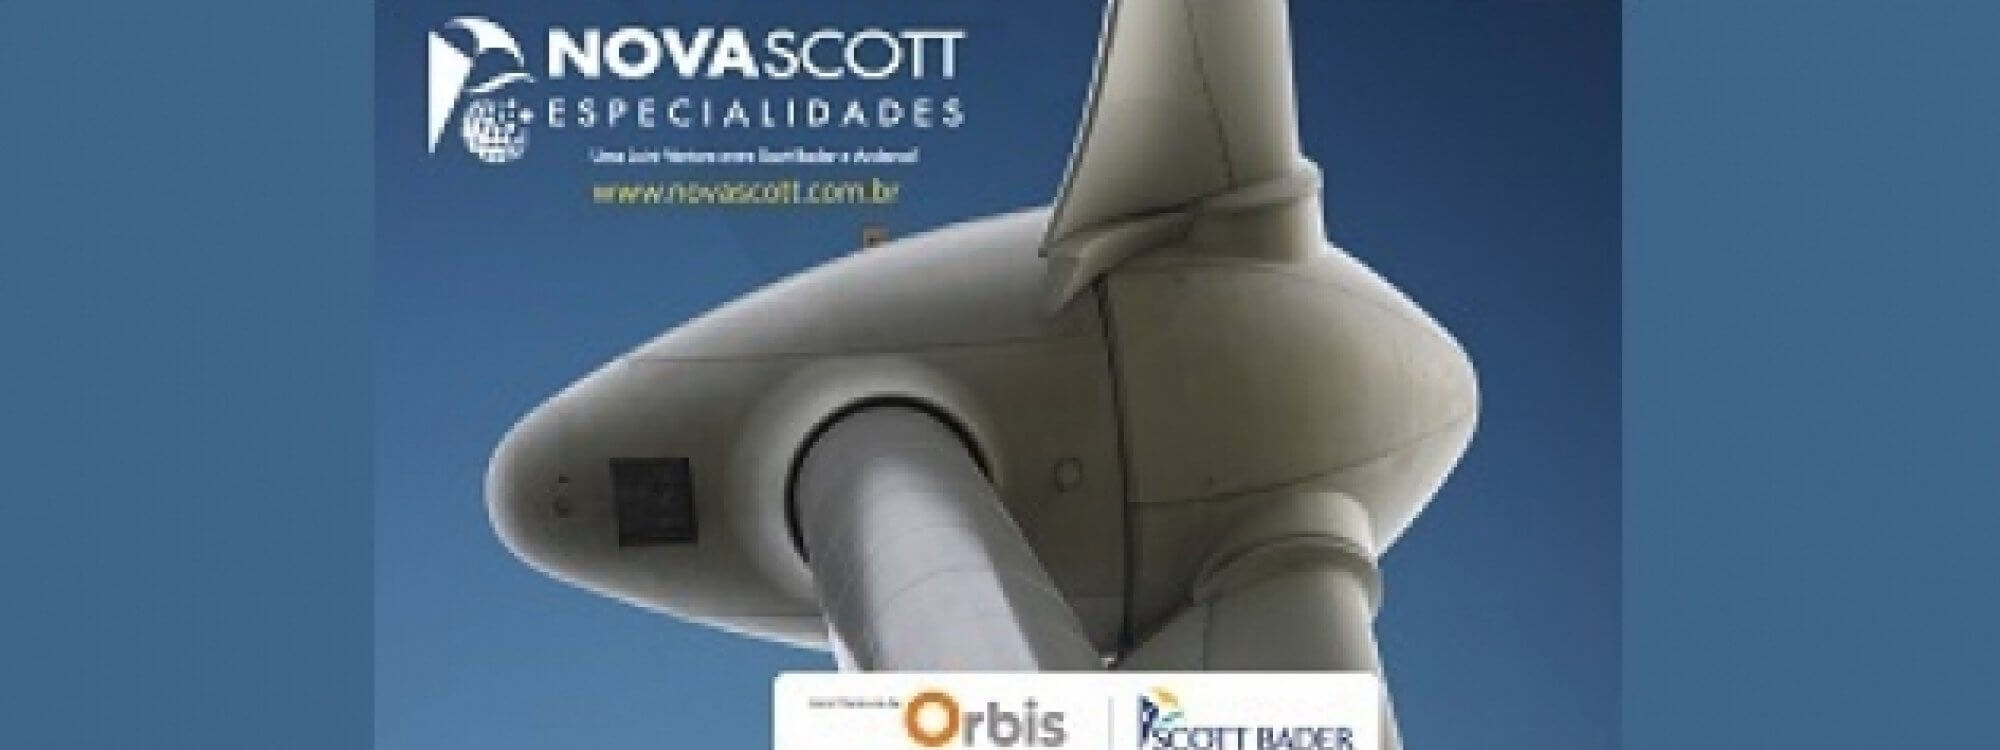 Scott Bader and Andercol, part of the Orbis Group, expand investment in Brazil to double the capacity of the Novascott joint venture